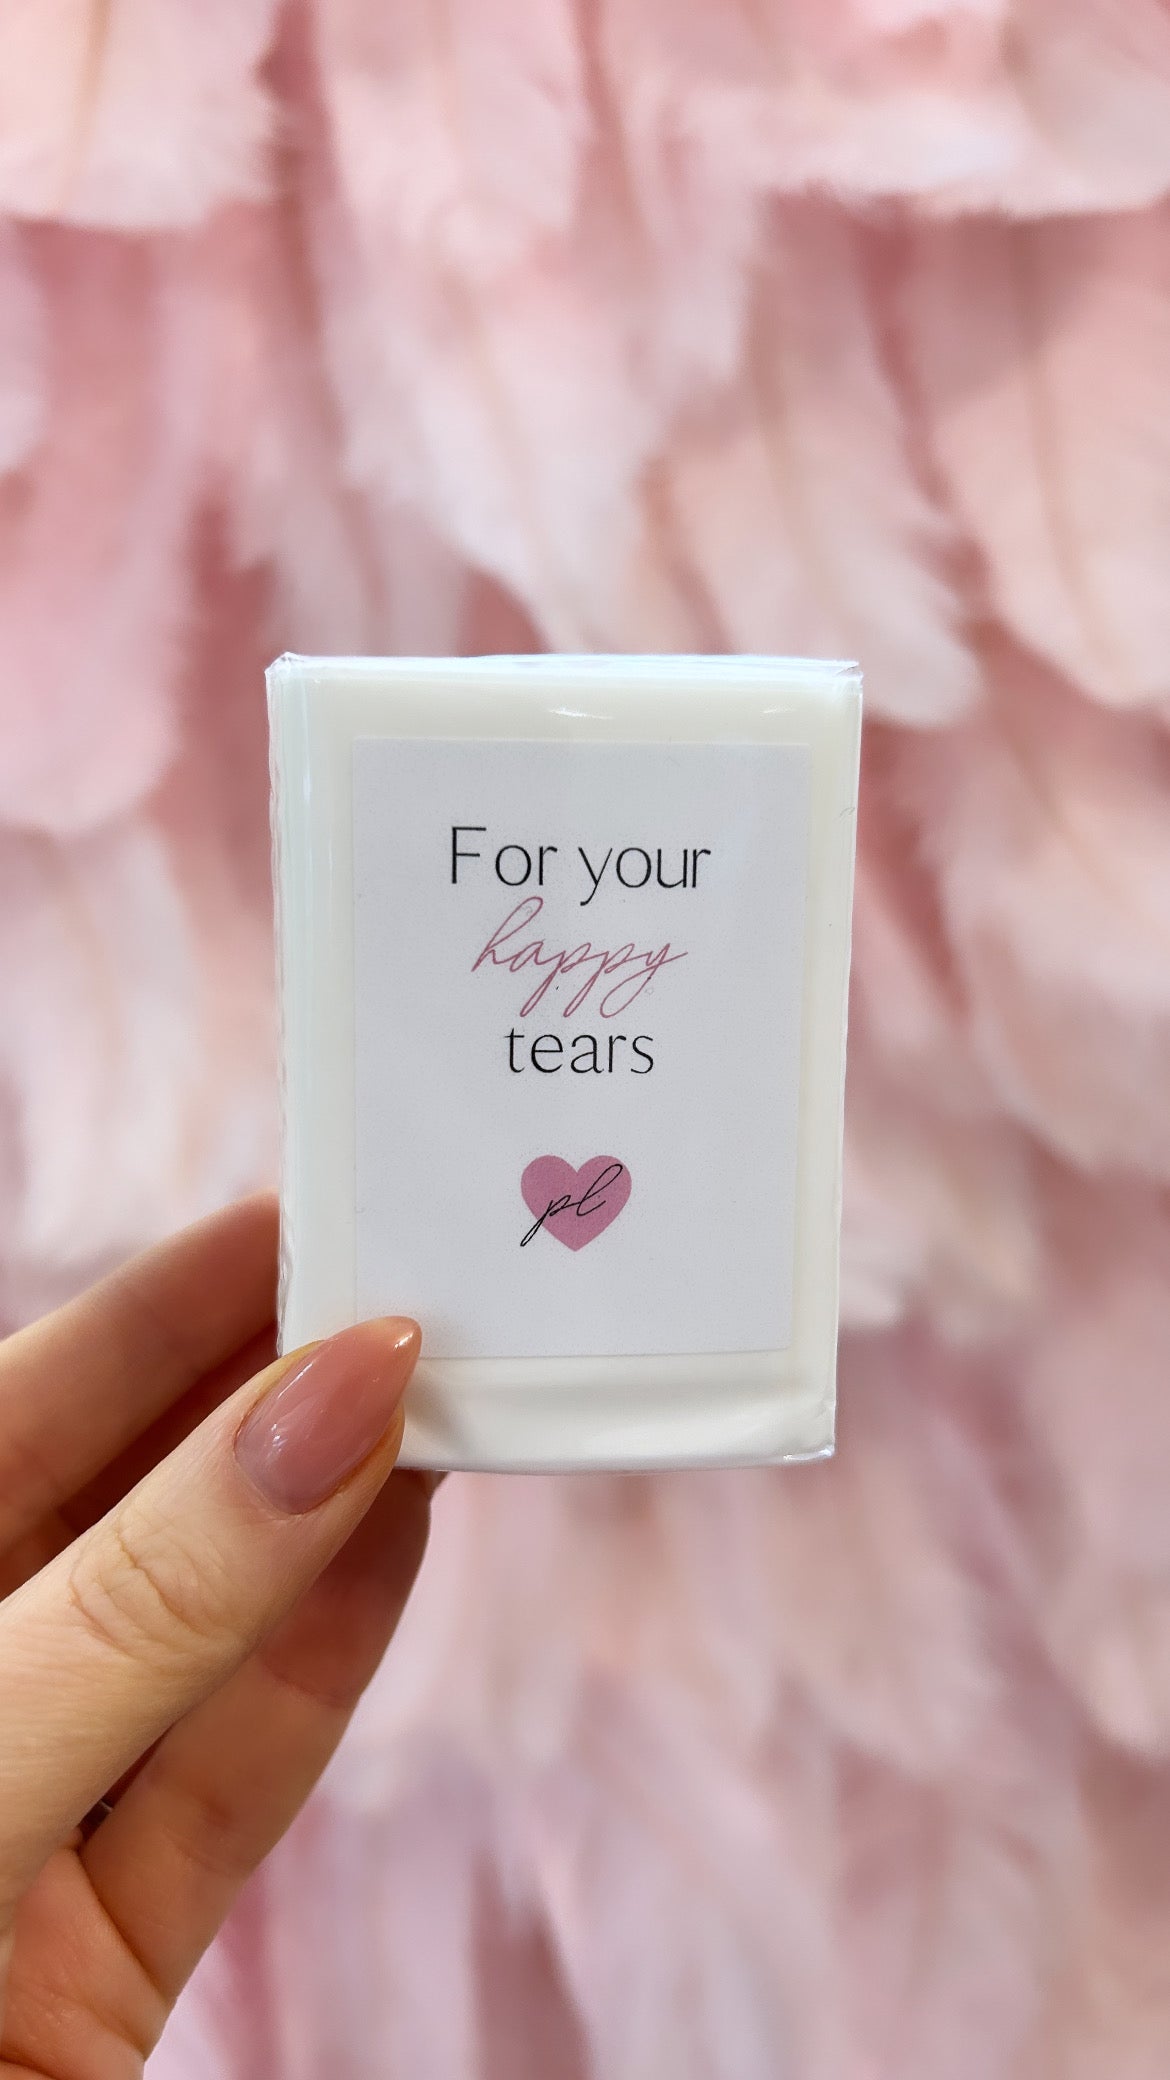 'For your happy tears' Tissues